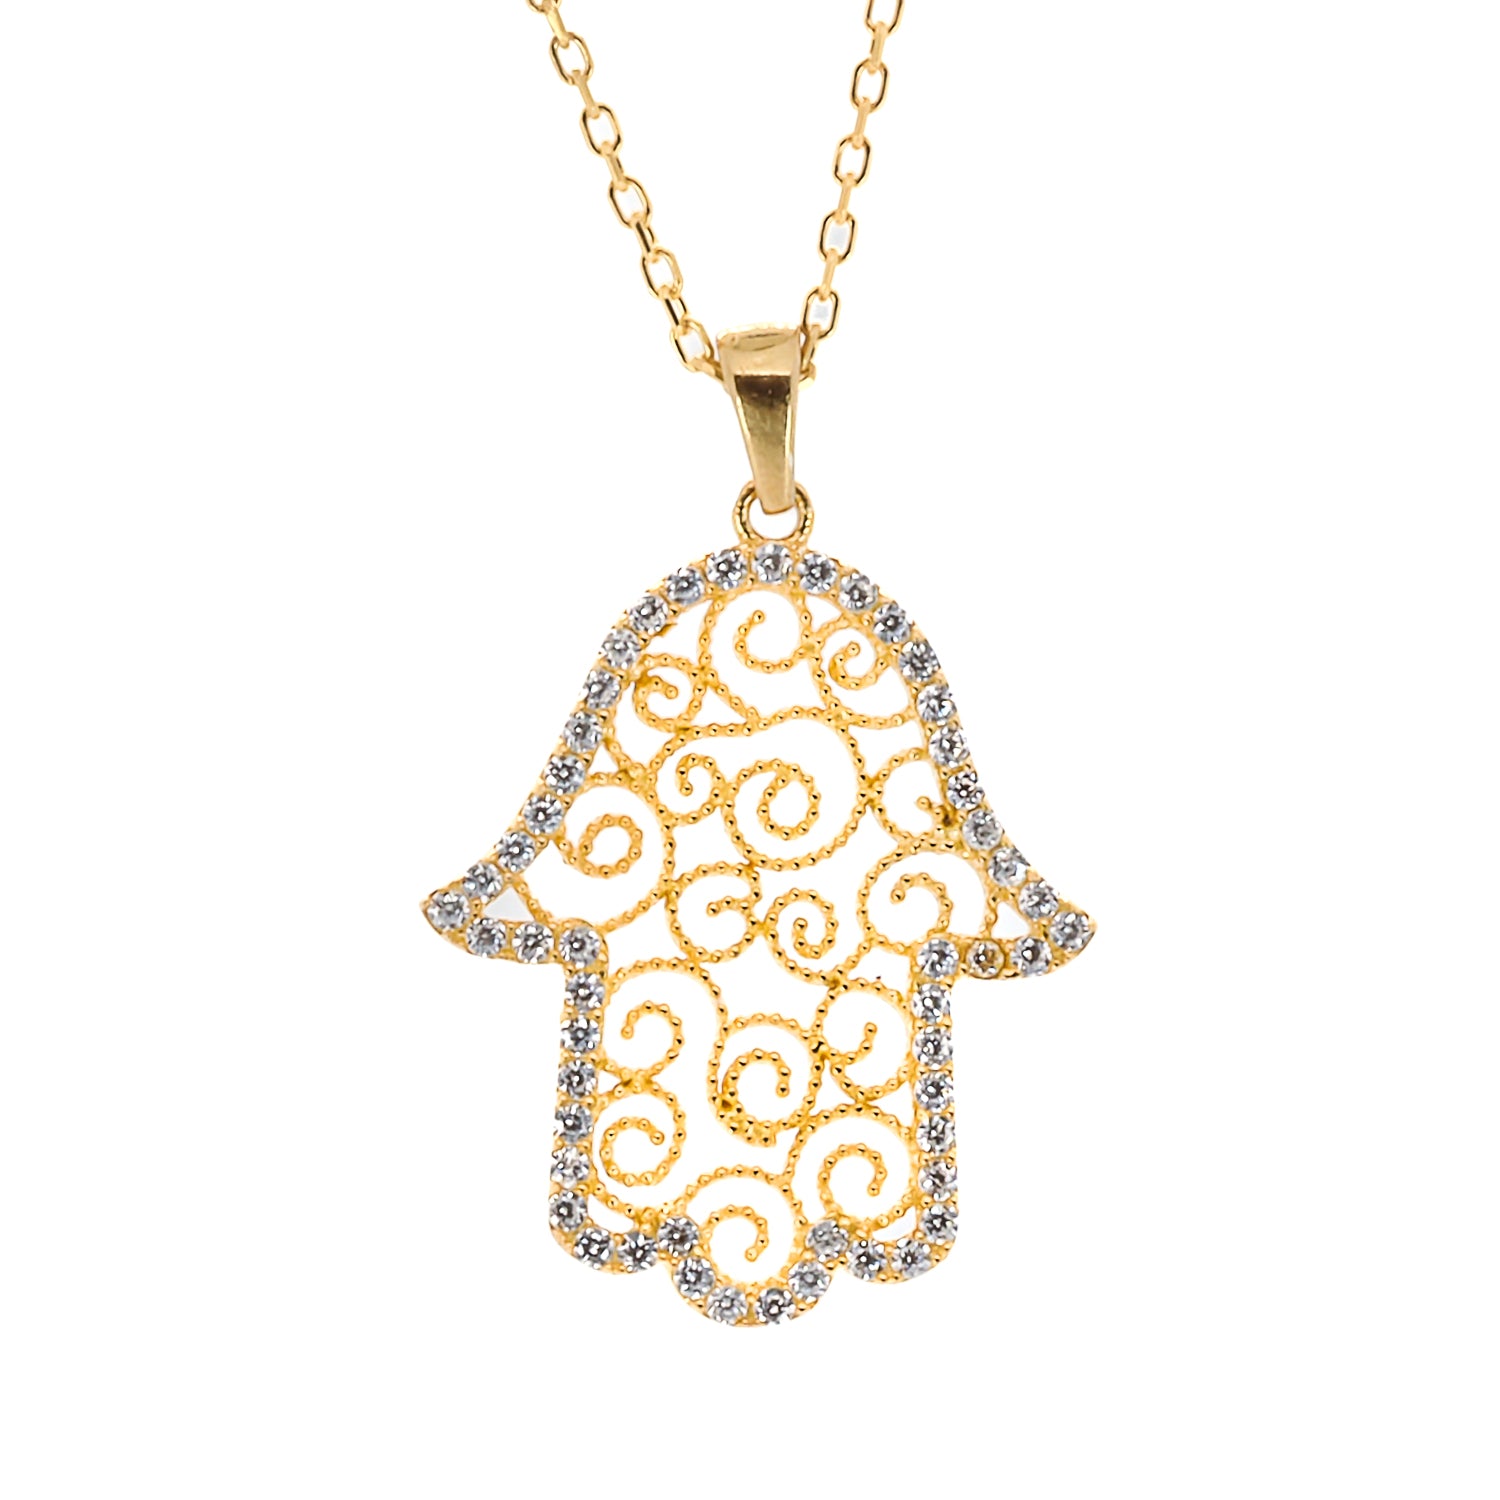 Gold Spiral Hamsa Necklace featuring a delicate Hamsa pendant crafted from 925 sterling silver and plated with 18k gold, adorned with sparkling CZ diamonds.